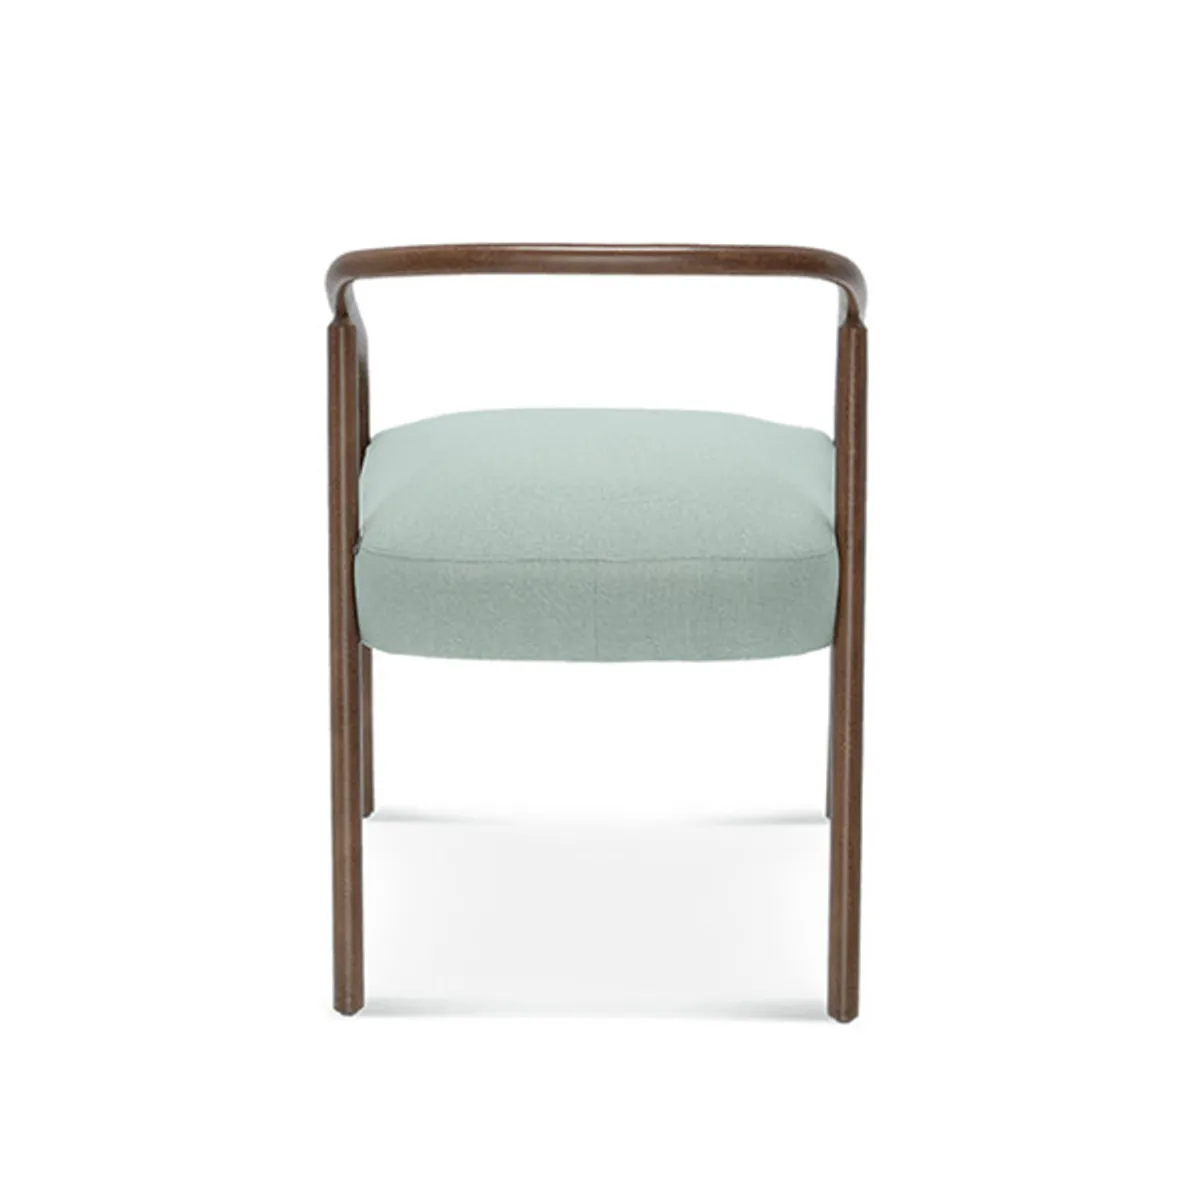 Nectar Armchair 2 Contemporary Bentwood Furniture Insideoutcontracts 020